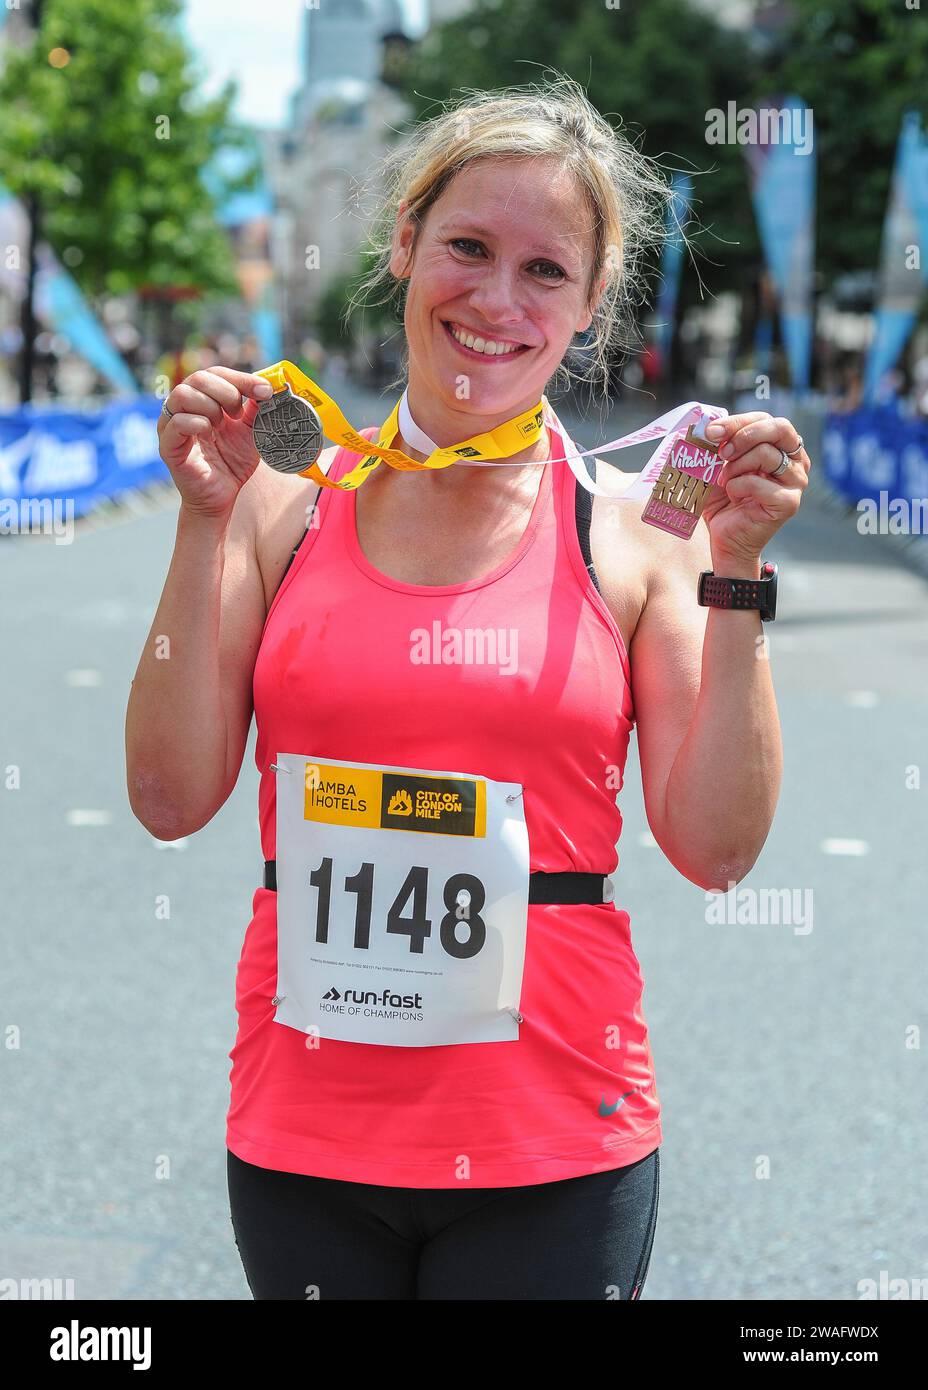 Sophie Jane Raworth journalist, newsreader and broadcaster receives her medals after competing in the Vitality Westminster half marathon, London UK on Stock Photo